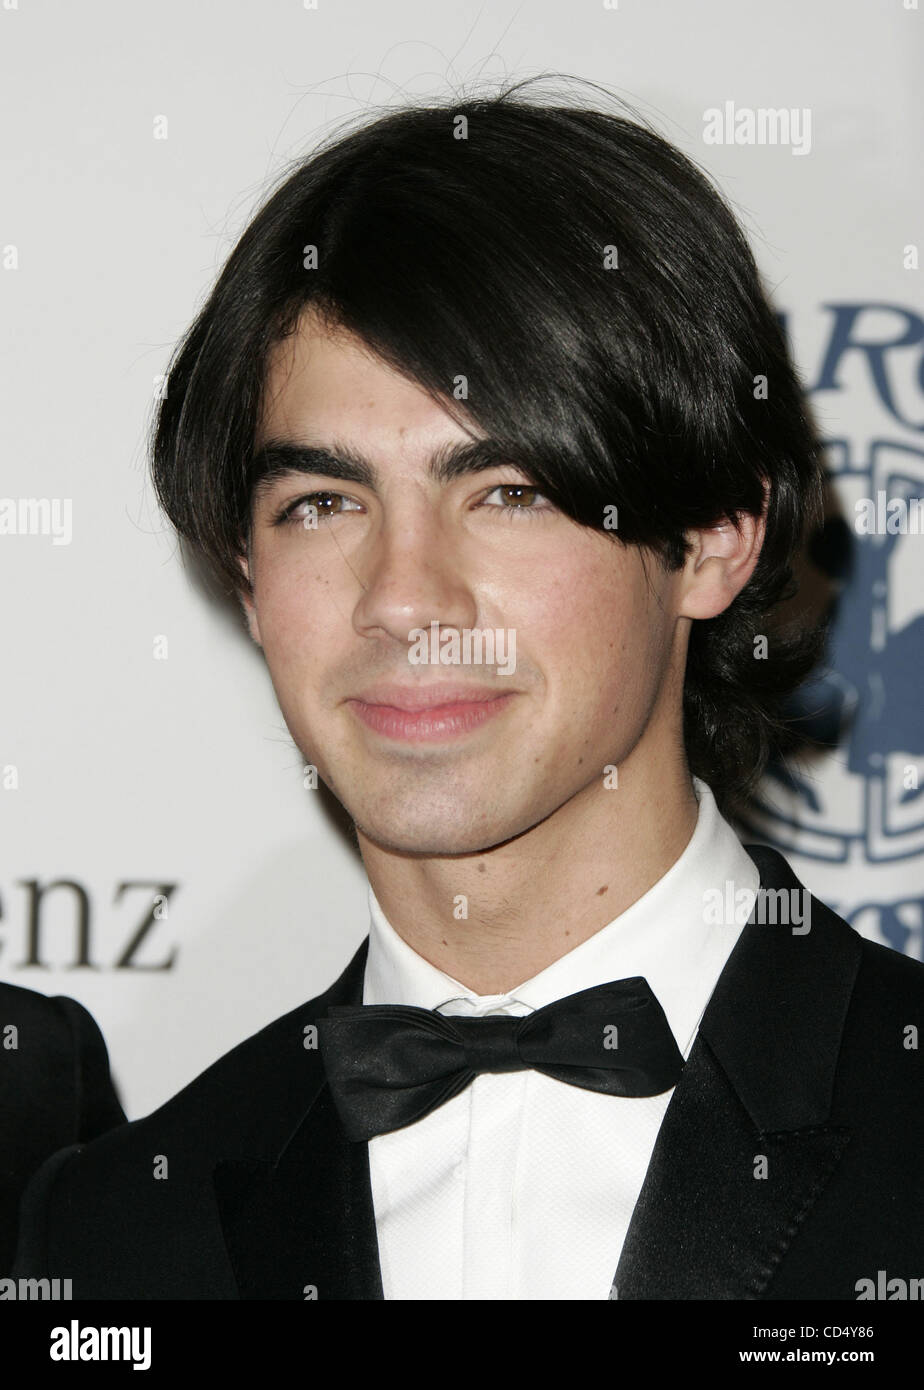 Oct 25, 2008 - Beverly Hills, California, USA - Singer JOE JONAS during arrivals at the The 30th Anniversary Carousel Of Hope Ball at the Beverly Hilton Hotel. (Credit Image: © Lisa O'Connor/ZUMA Press) Stock Photo